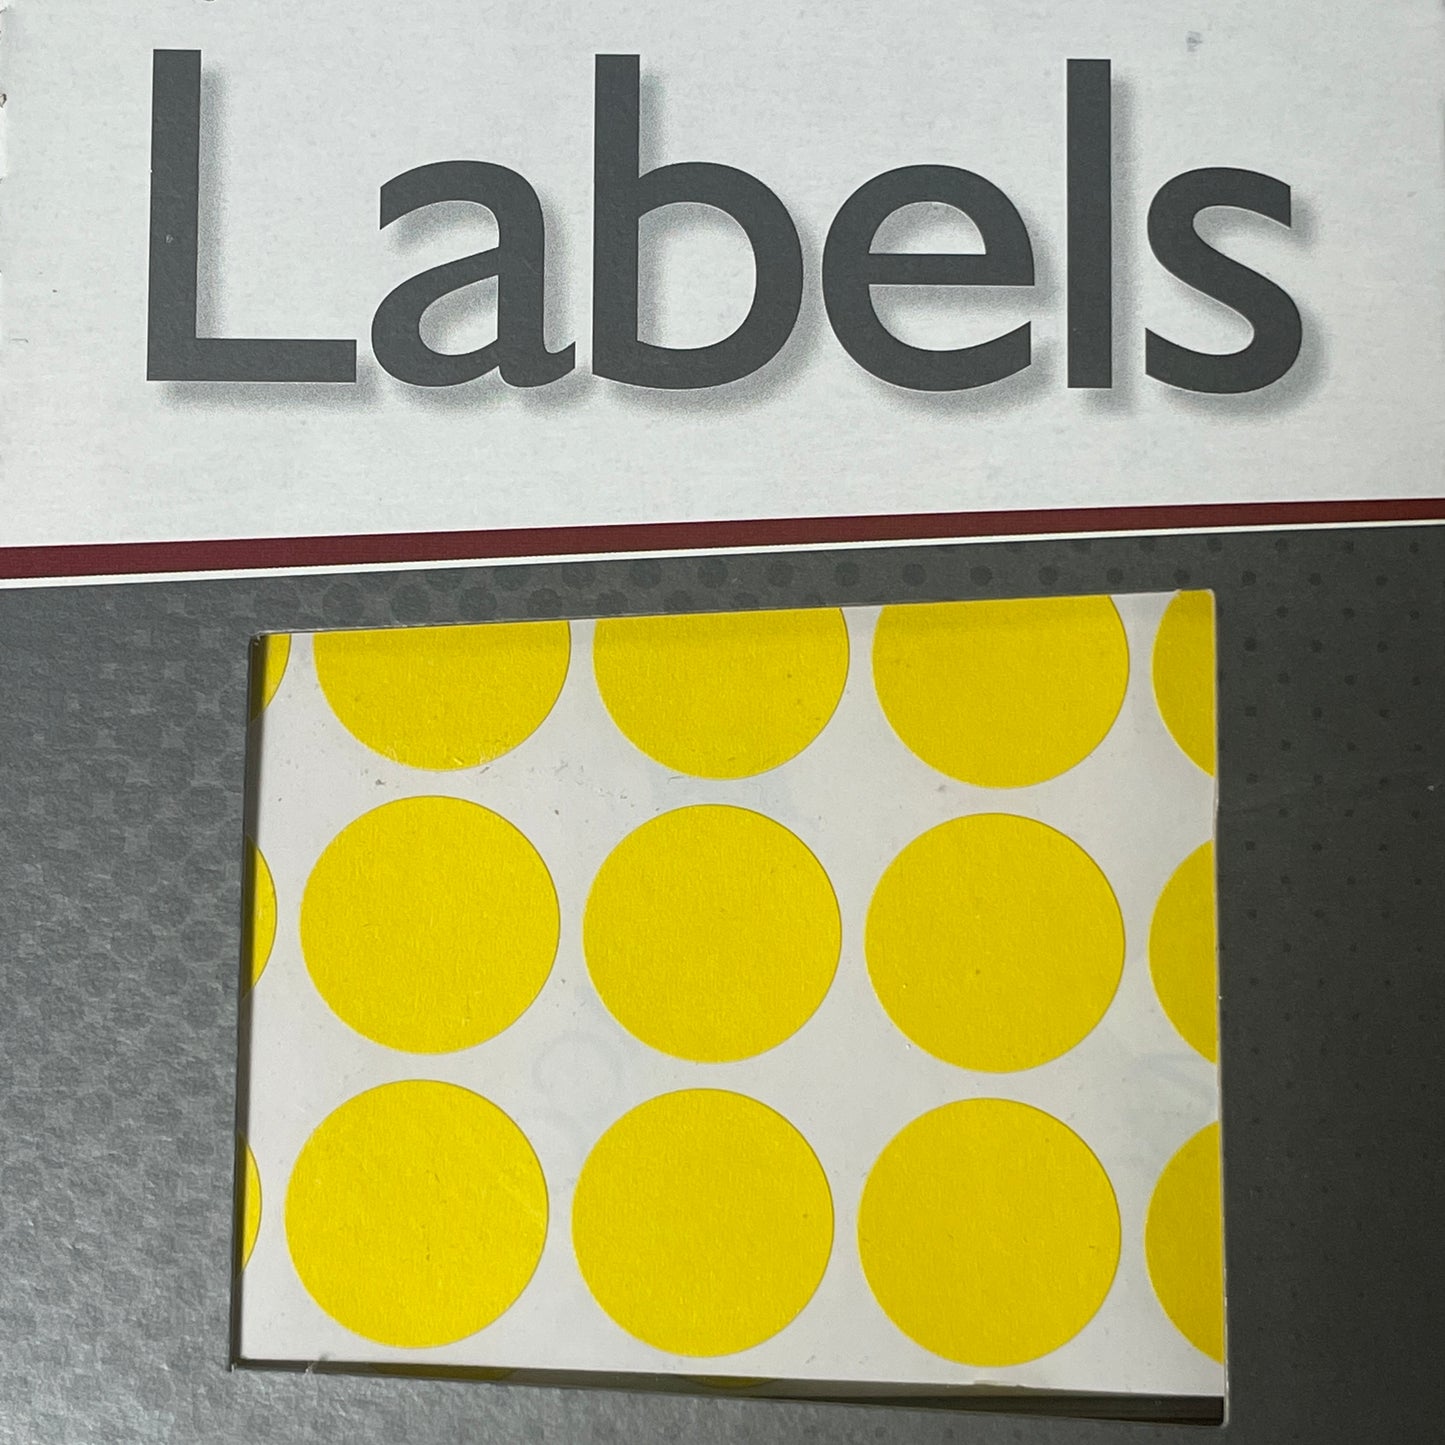 MACO Round YELLOW Color-Coding Labels Dots 3/4” Dia. 1000 Labels MR1212-4